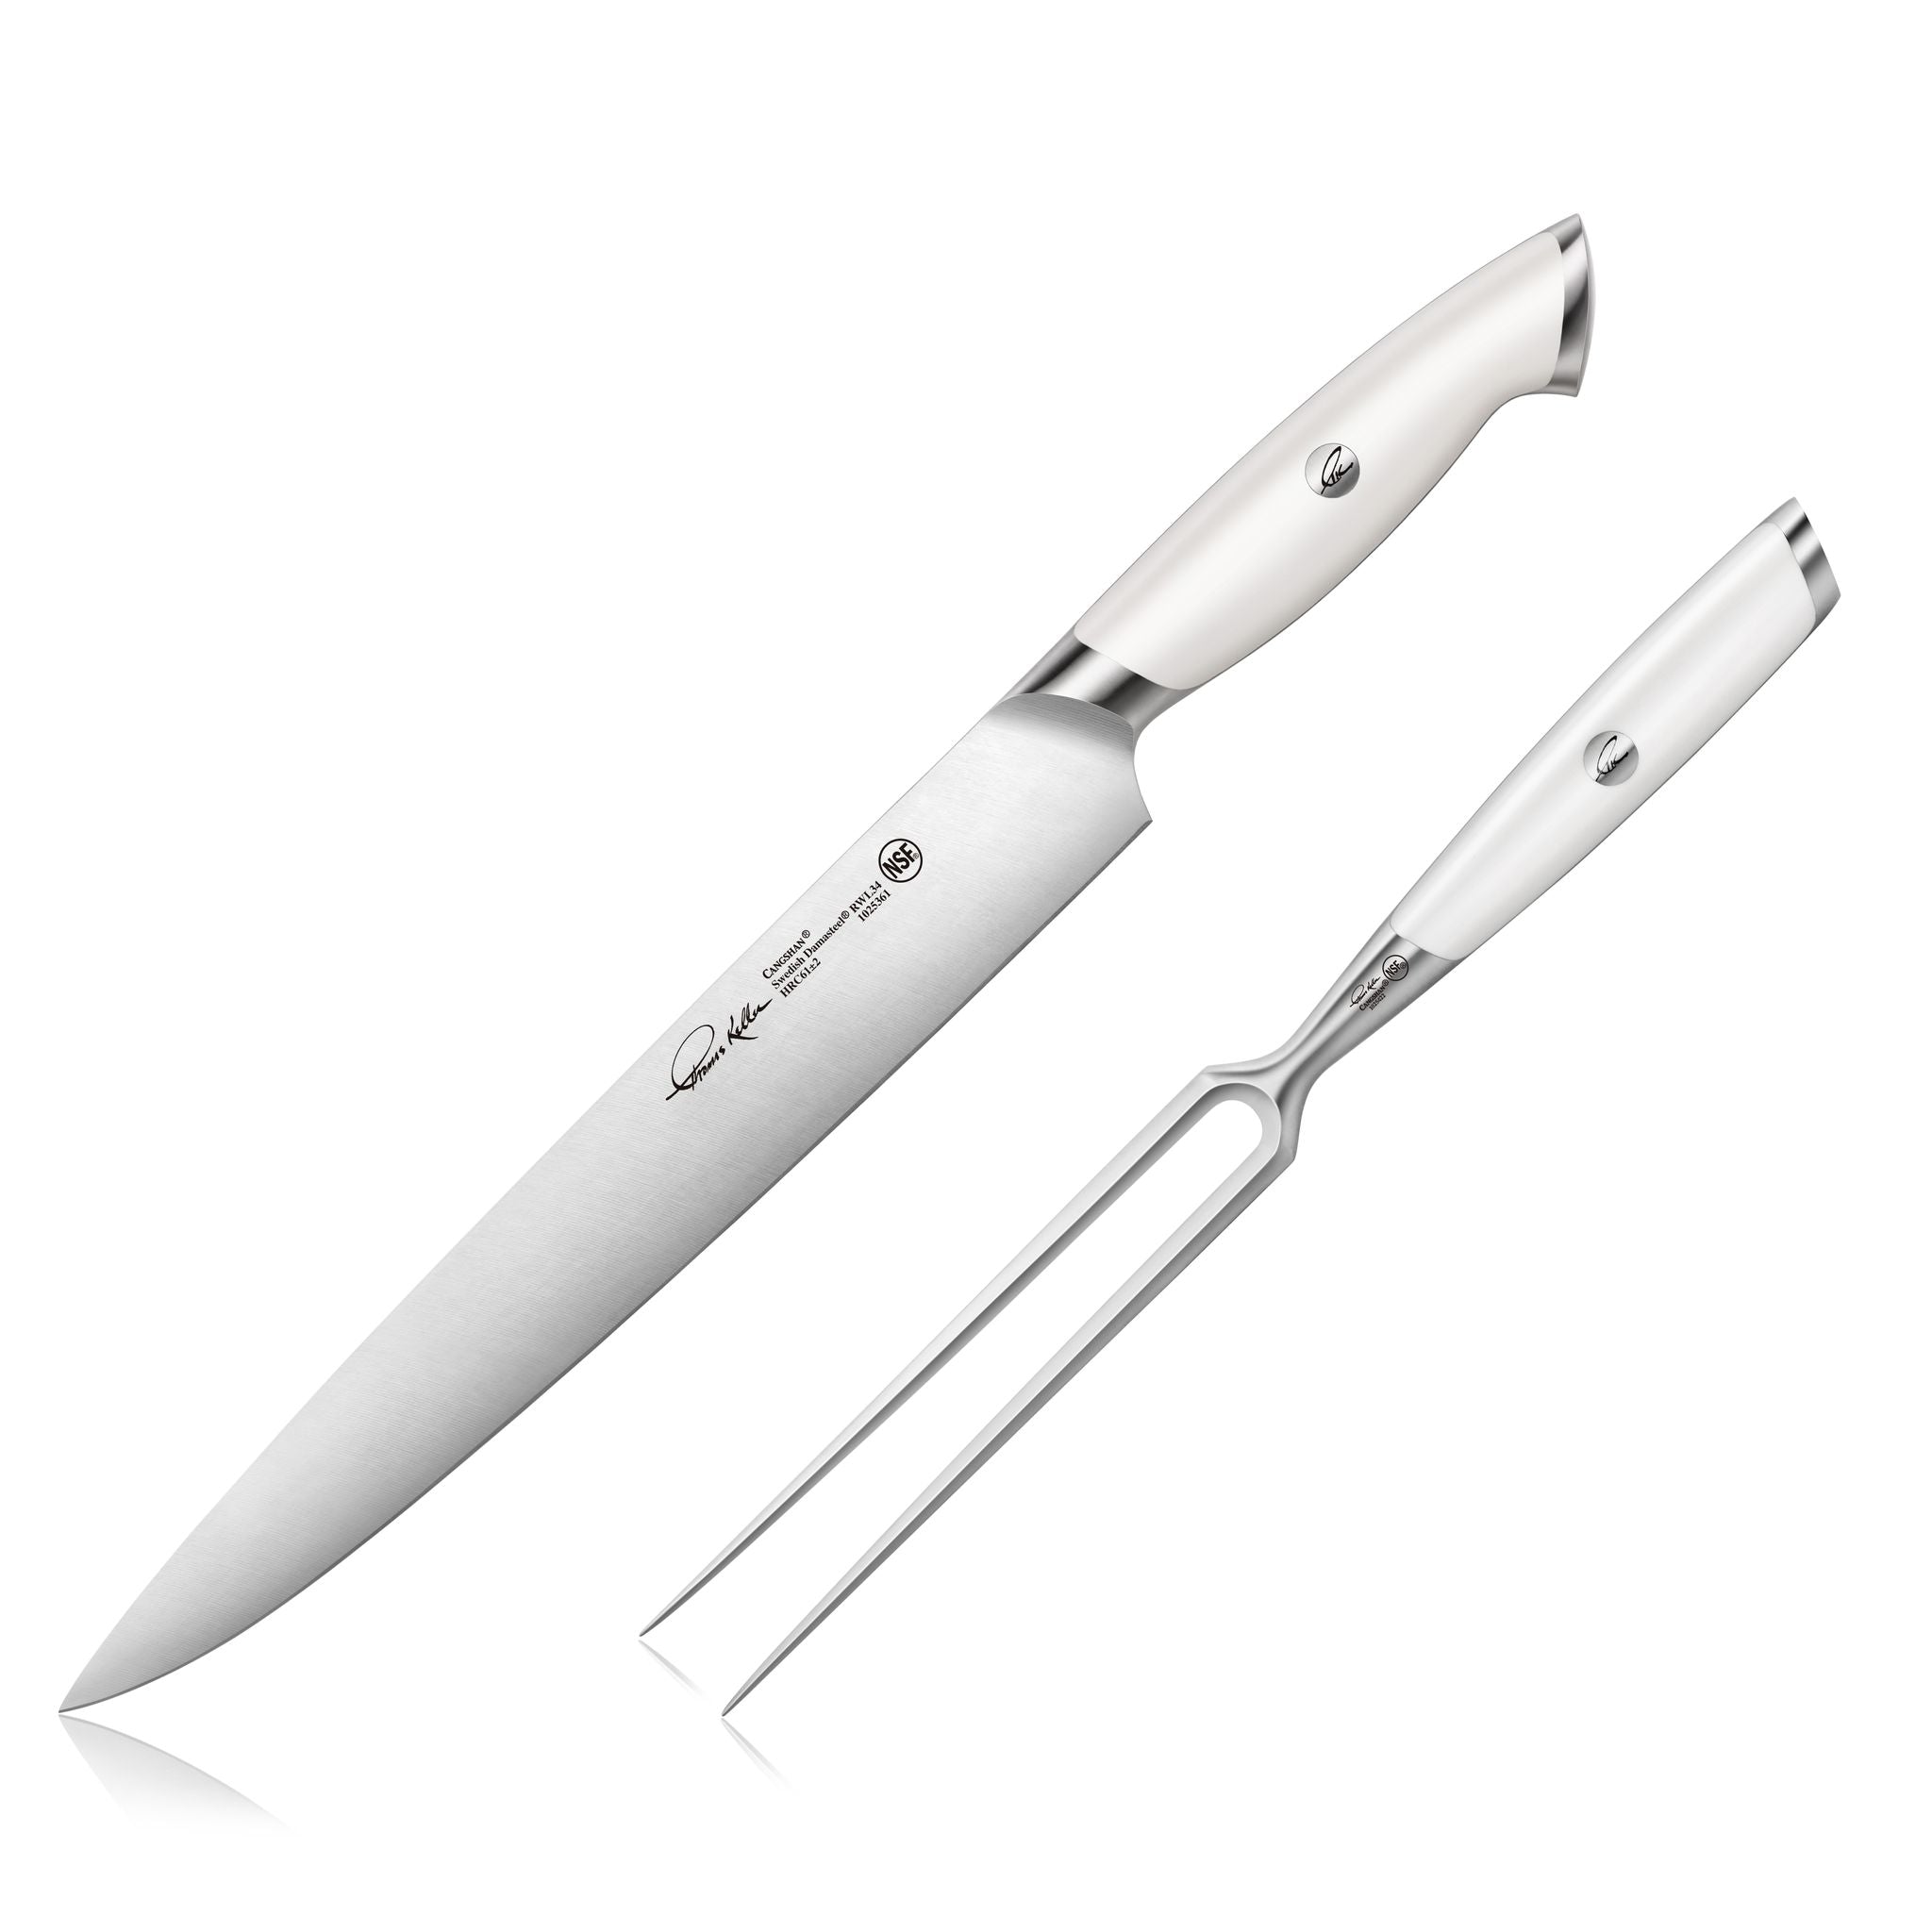 Hastings Home 129832QDS Electric Carving Knife Set, 2 Stainless Steel